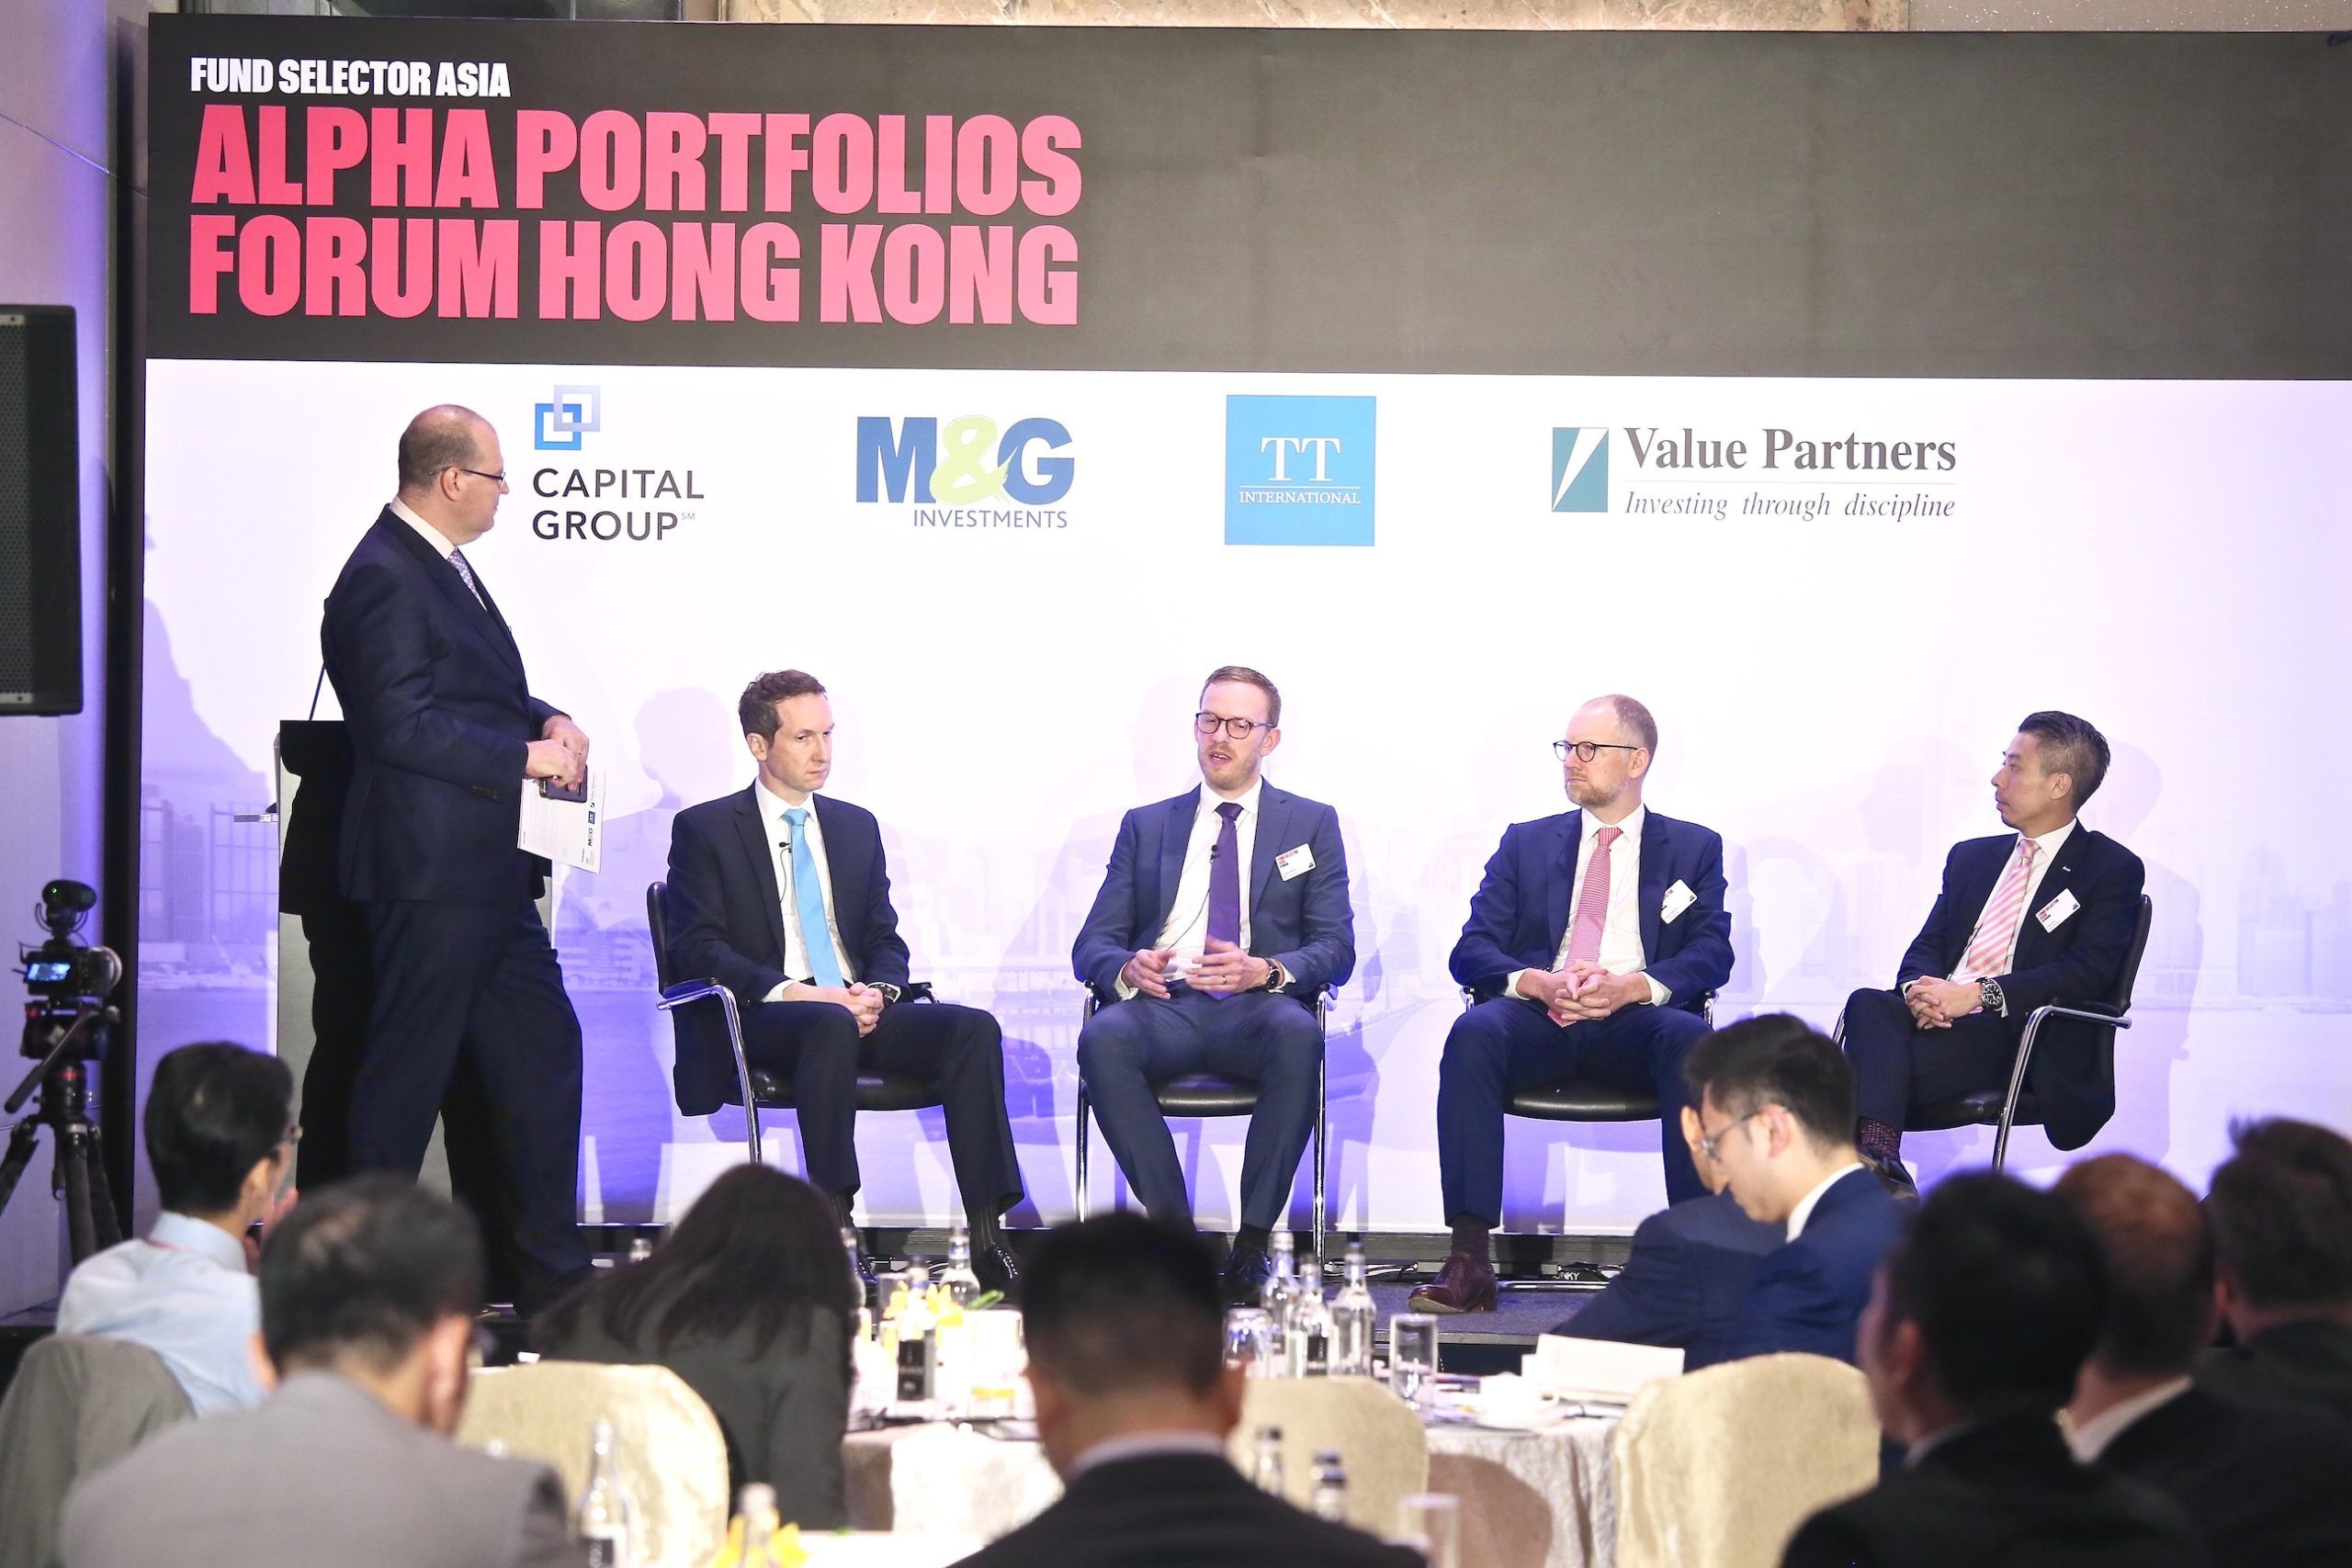 Panel discussion in Hong Kong